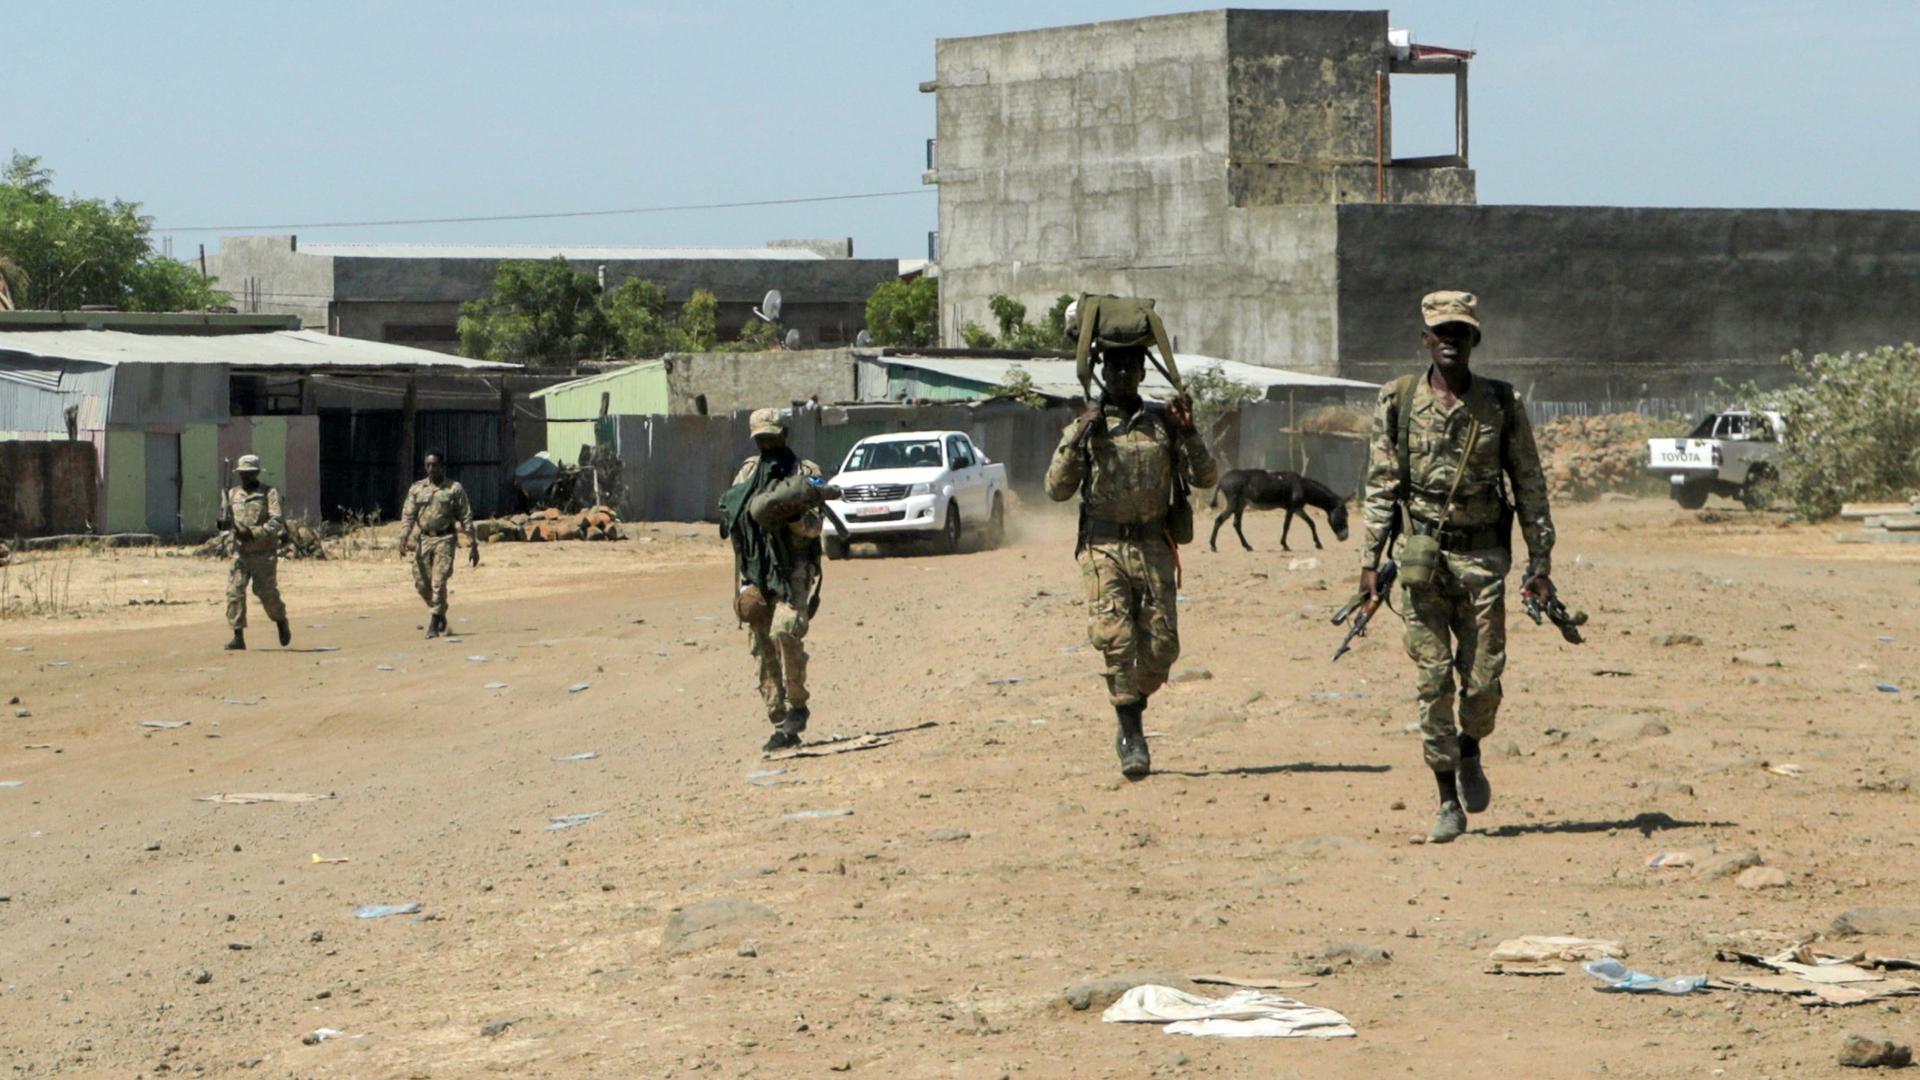 A small group of soldiers are shown walking and carrying weapons with a large cement structure in the distance.